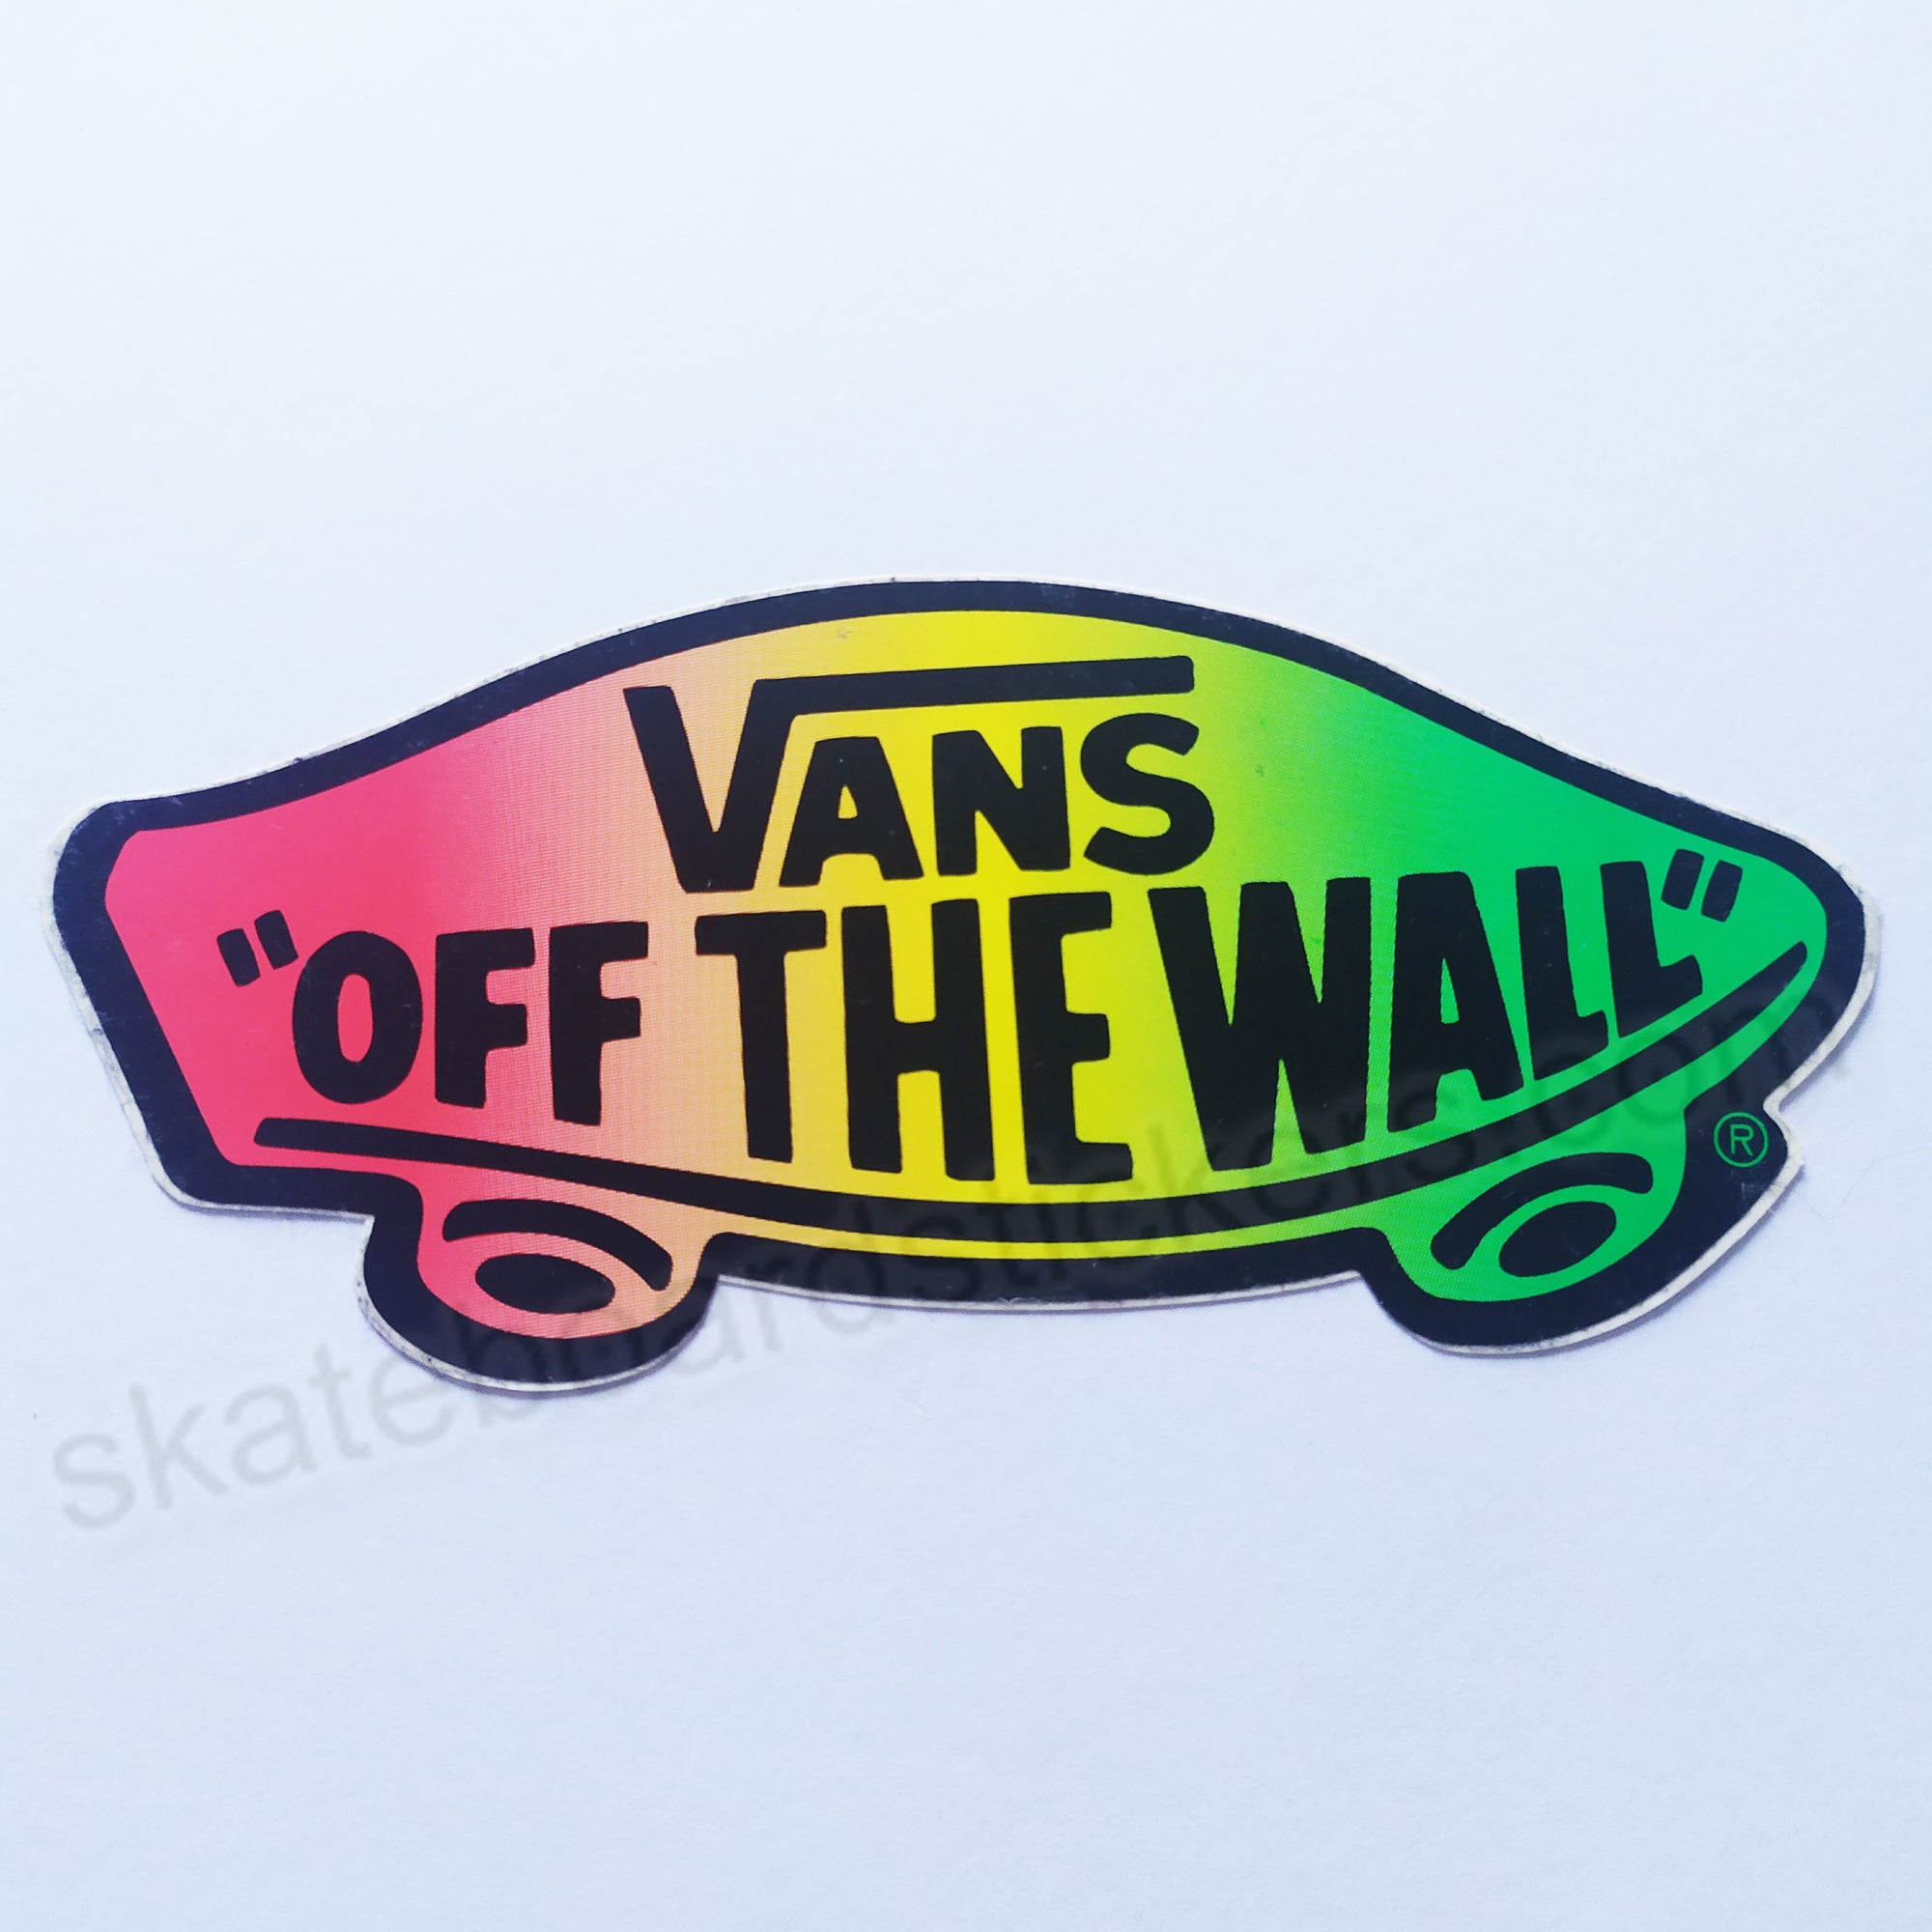 Vans Shoes Skateboard Sticker - Off The Wall - 15cm across approx - Red/Gold/Green - SkateboardStickers.com